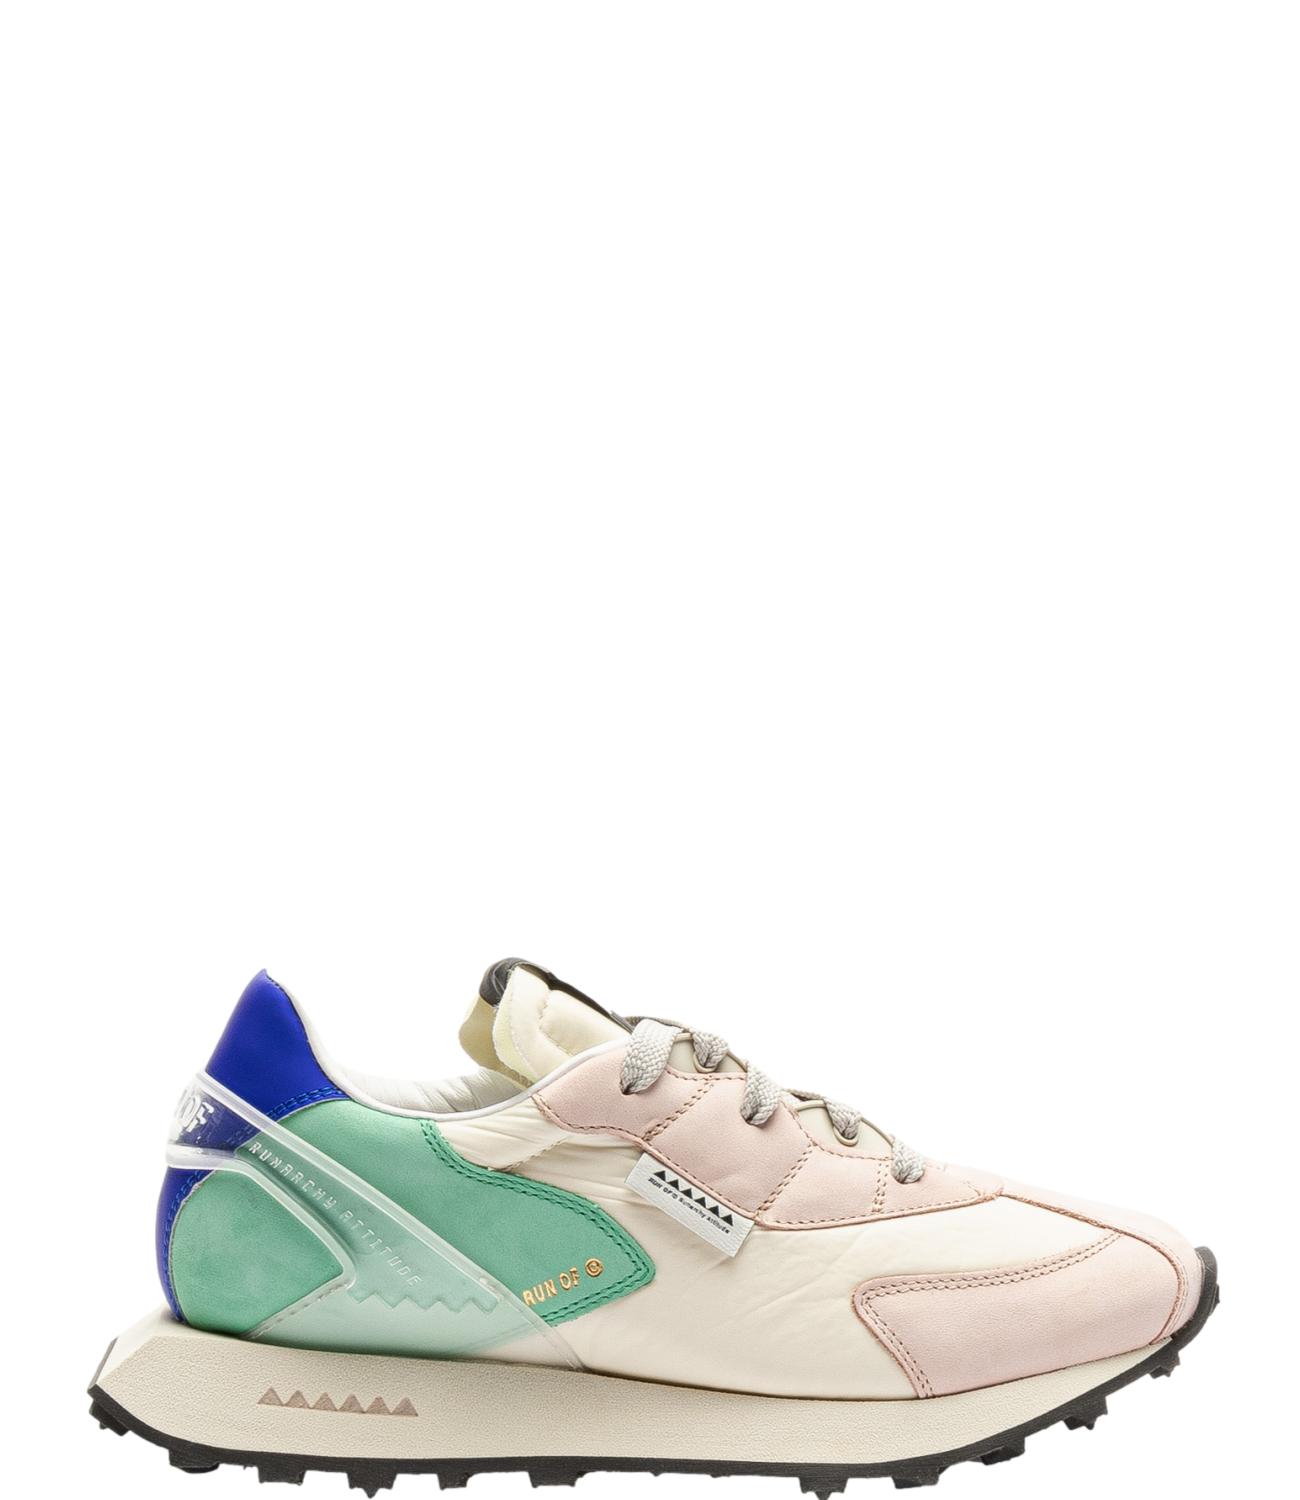 Run Of Sneakers Donna rosa verde MADEIRA